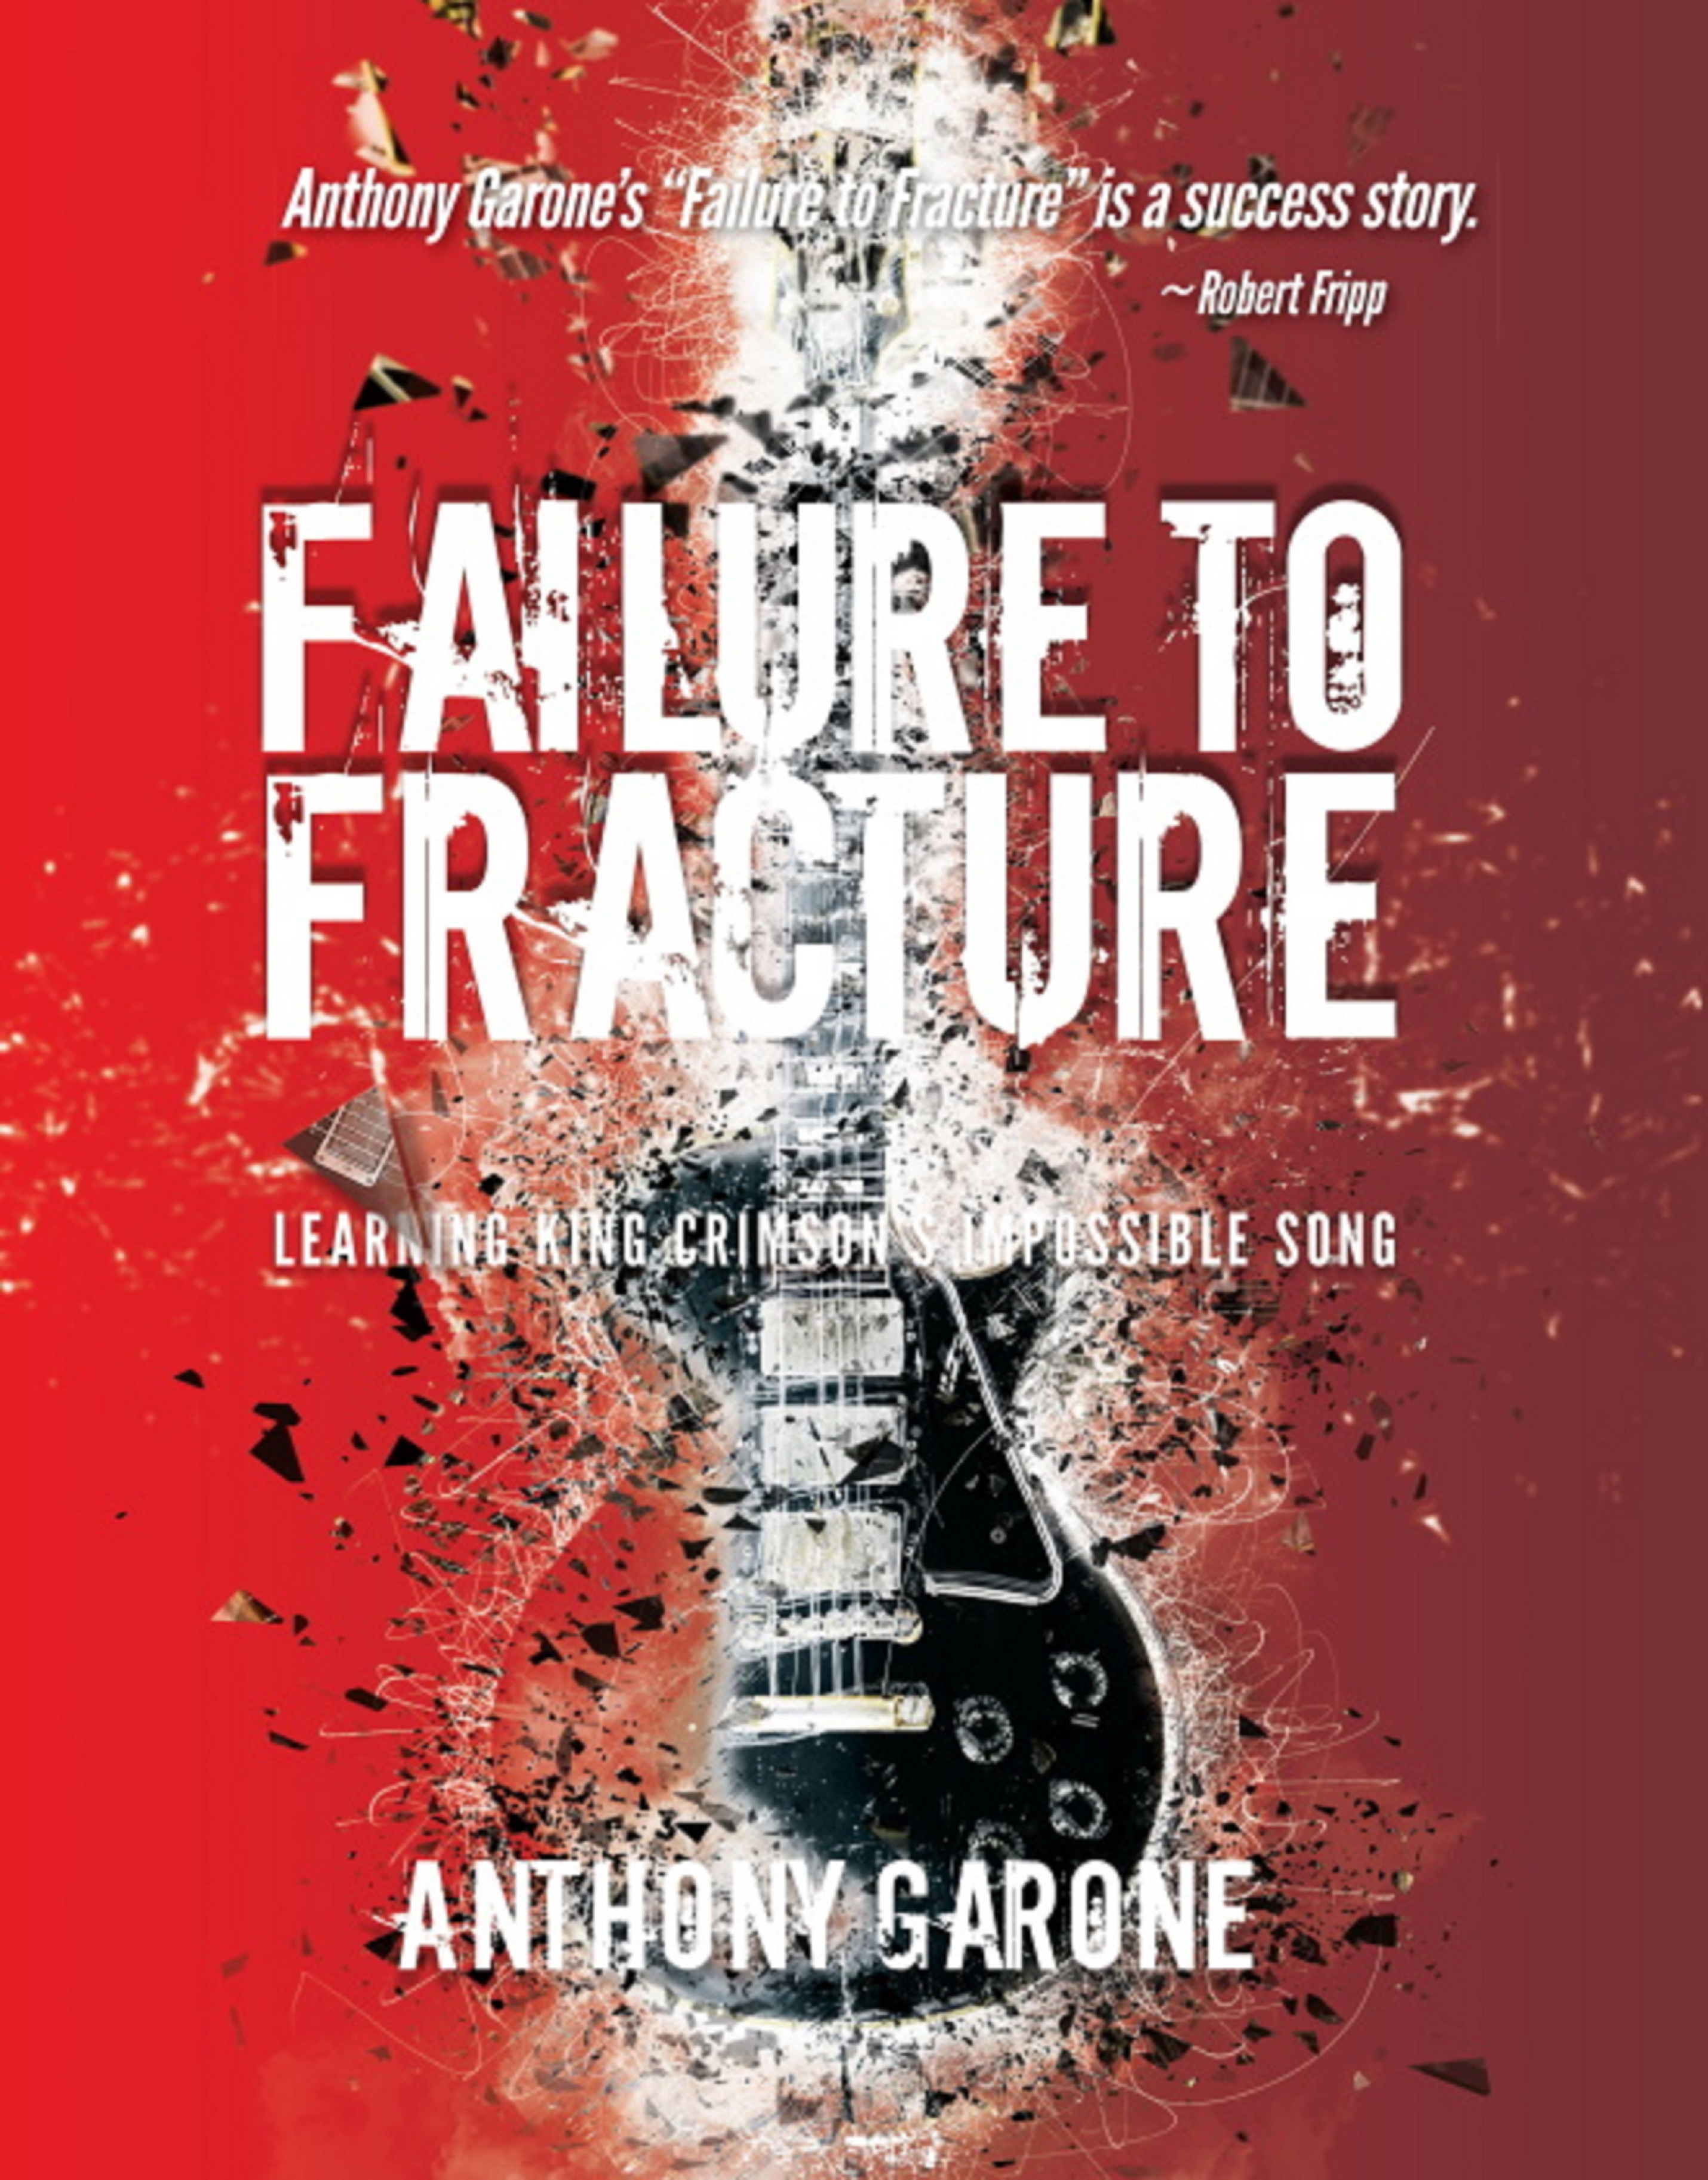 Guitar Flash 3: Mistakes Like Fractures